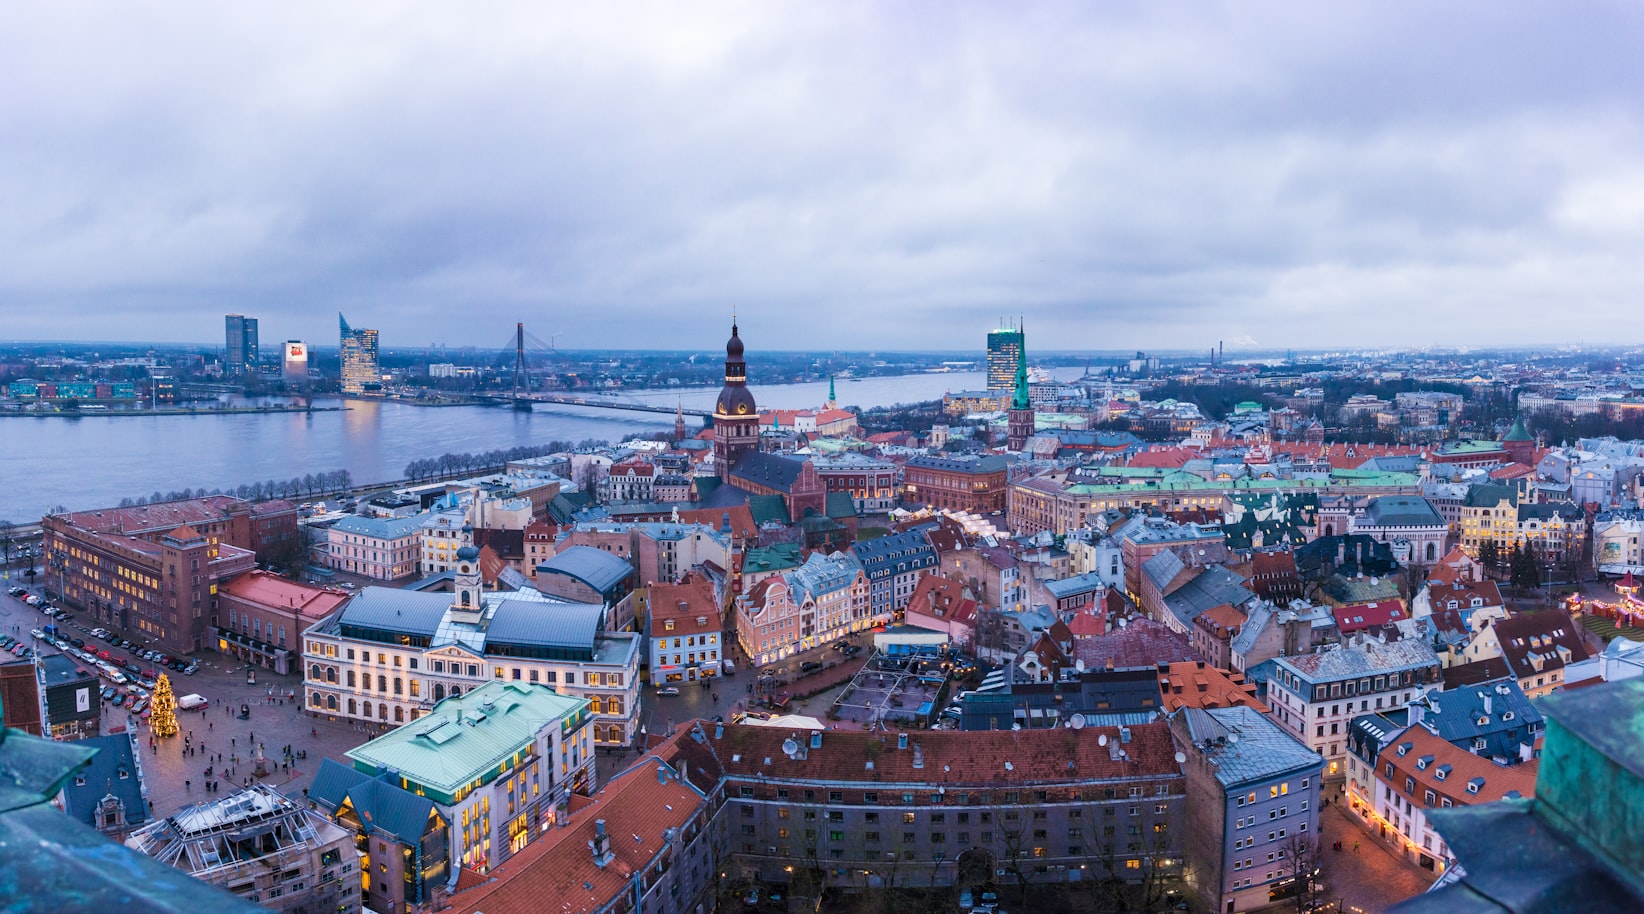 Riga is the charming capital of Latvia, known for its beautiful architecture, rich culture, and excellent food and drink